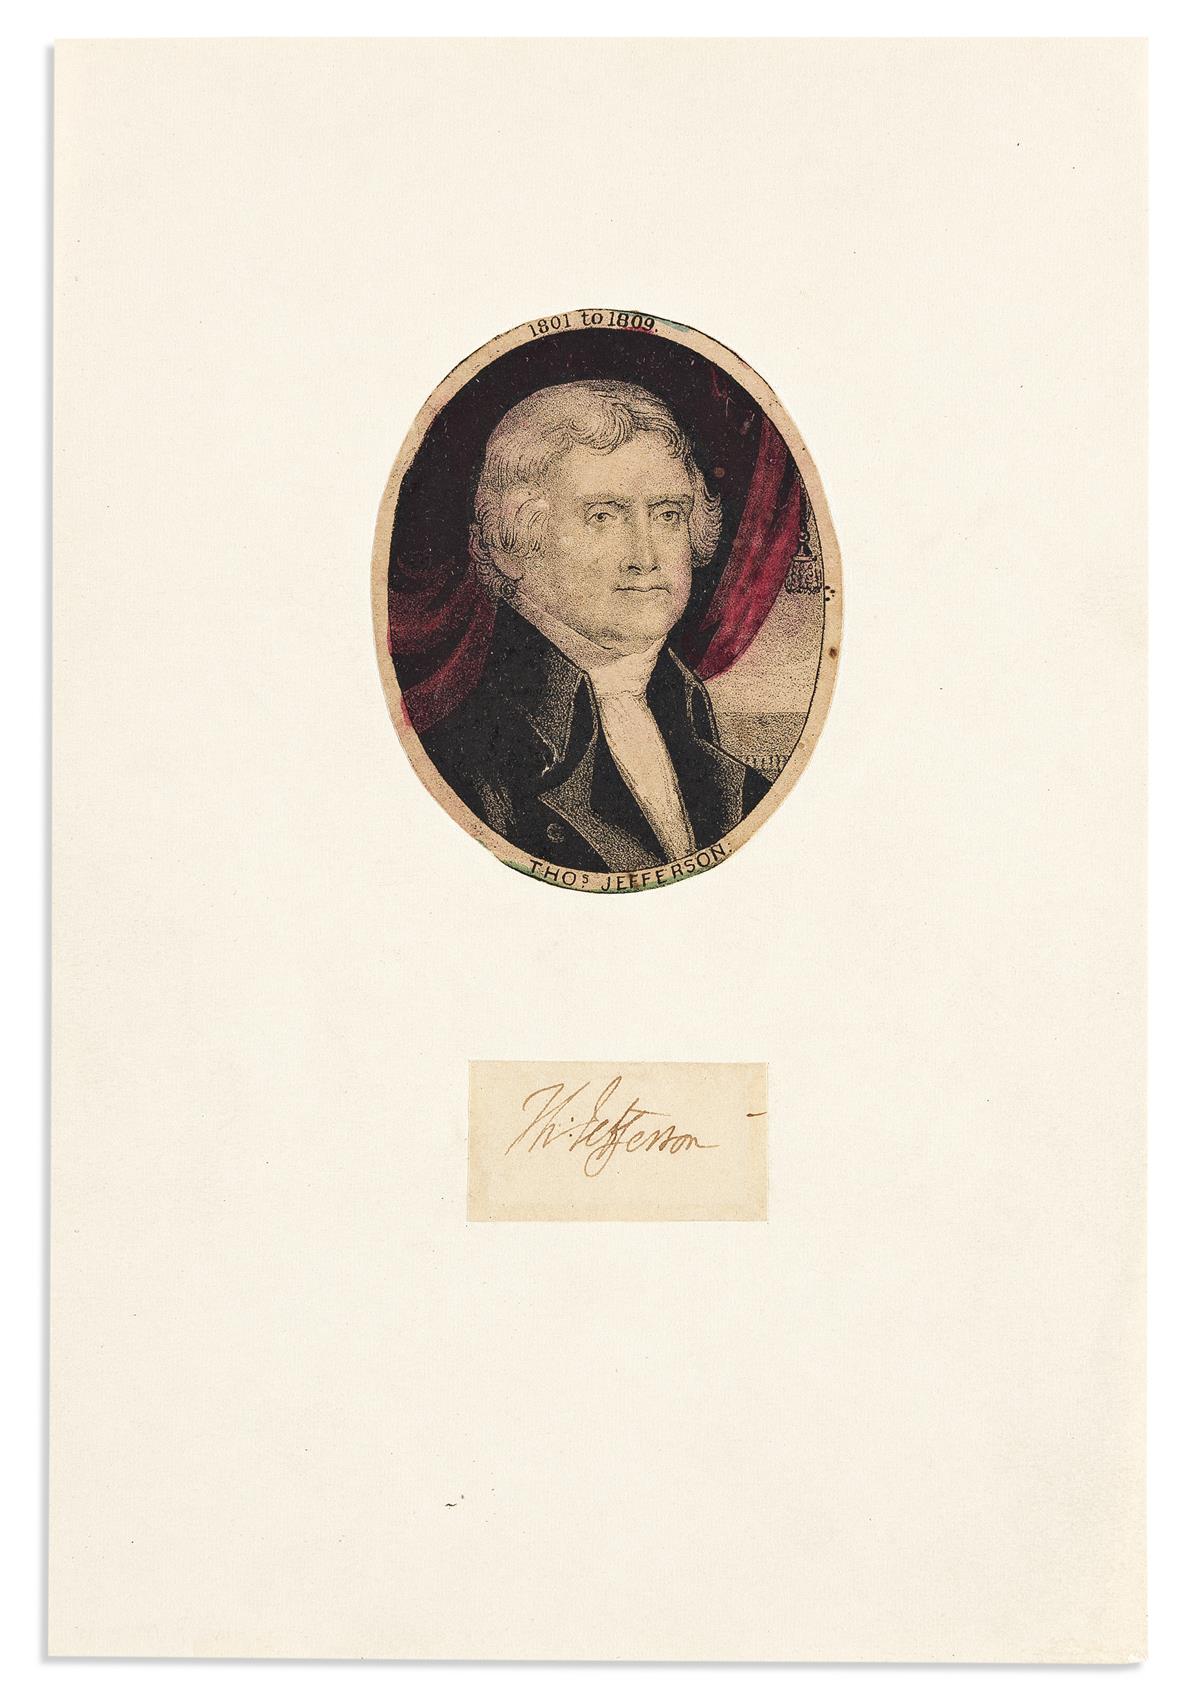 JEFFERSON, THOMAS. Clipped Signature, Th:Jefferson, inlaid into a sheet with a printed portrait.